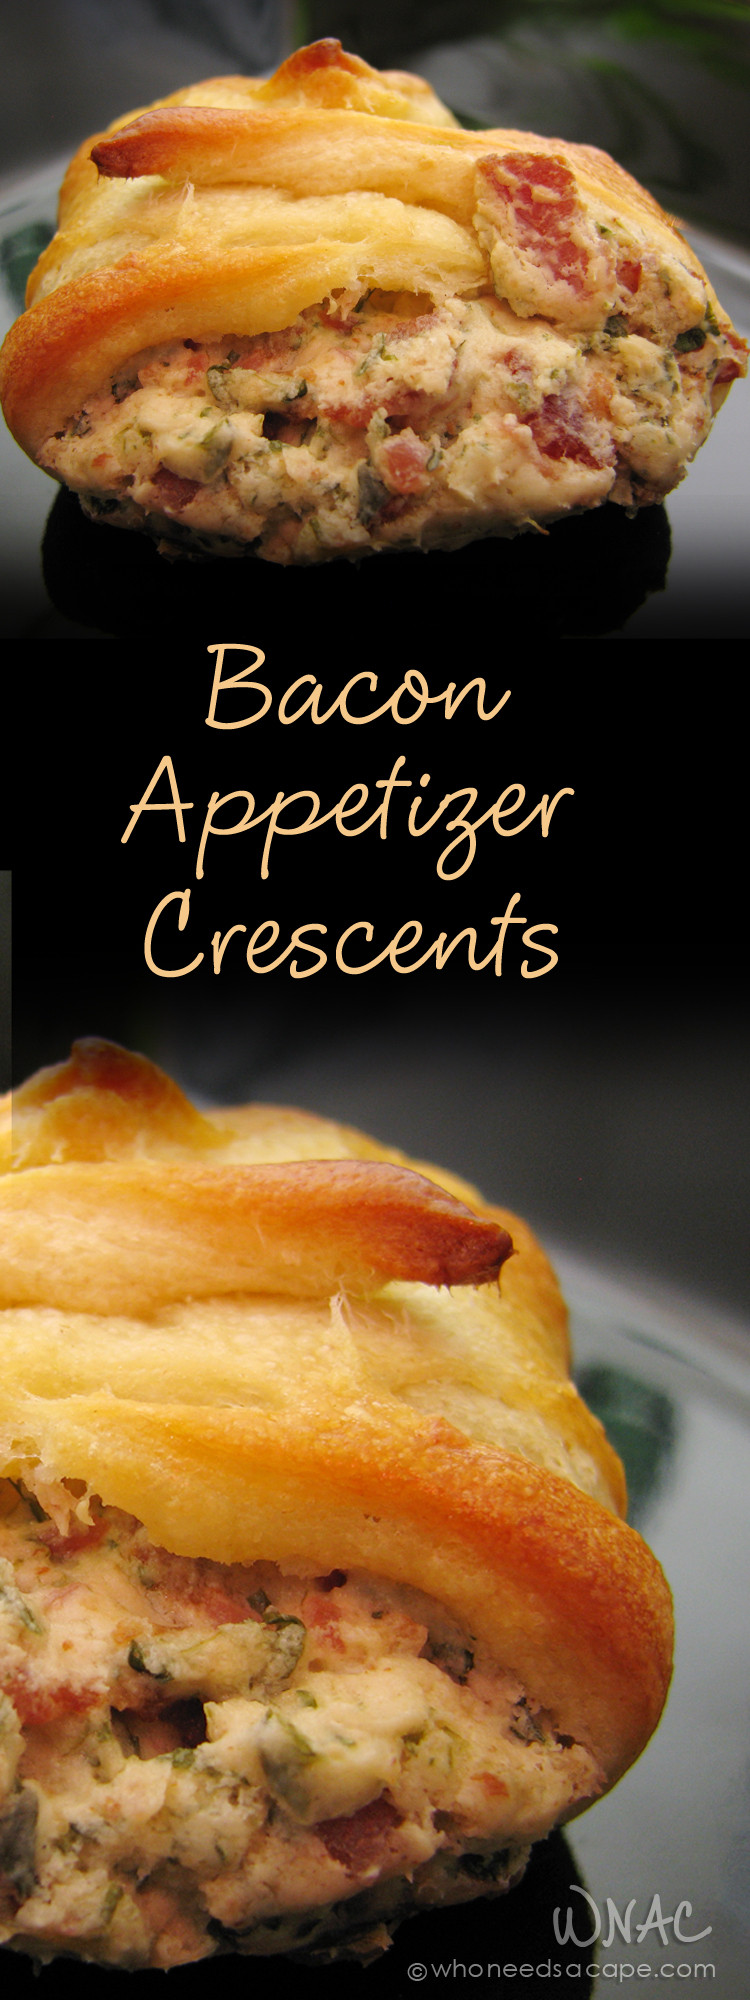 Appetizers With Crescent Rolls
 Bacon Appetizer Crescents